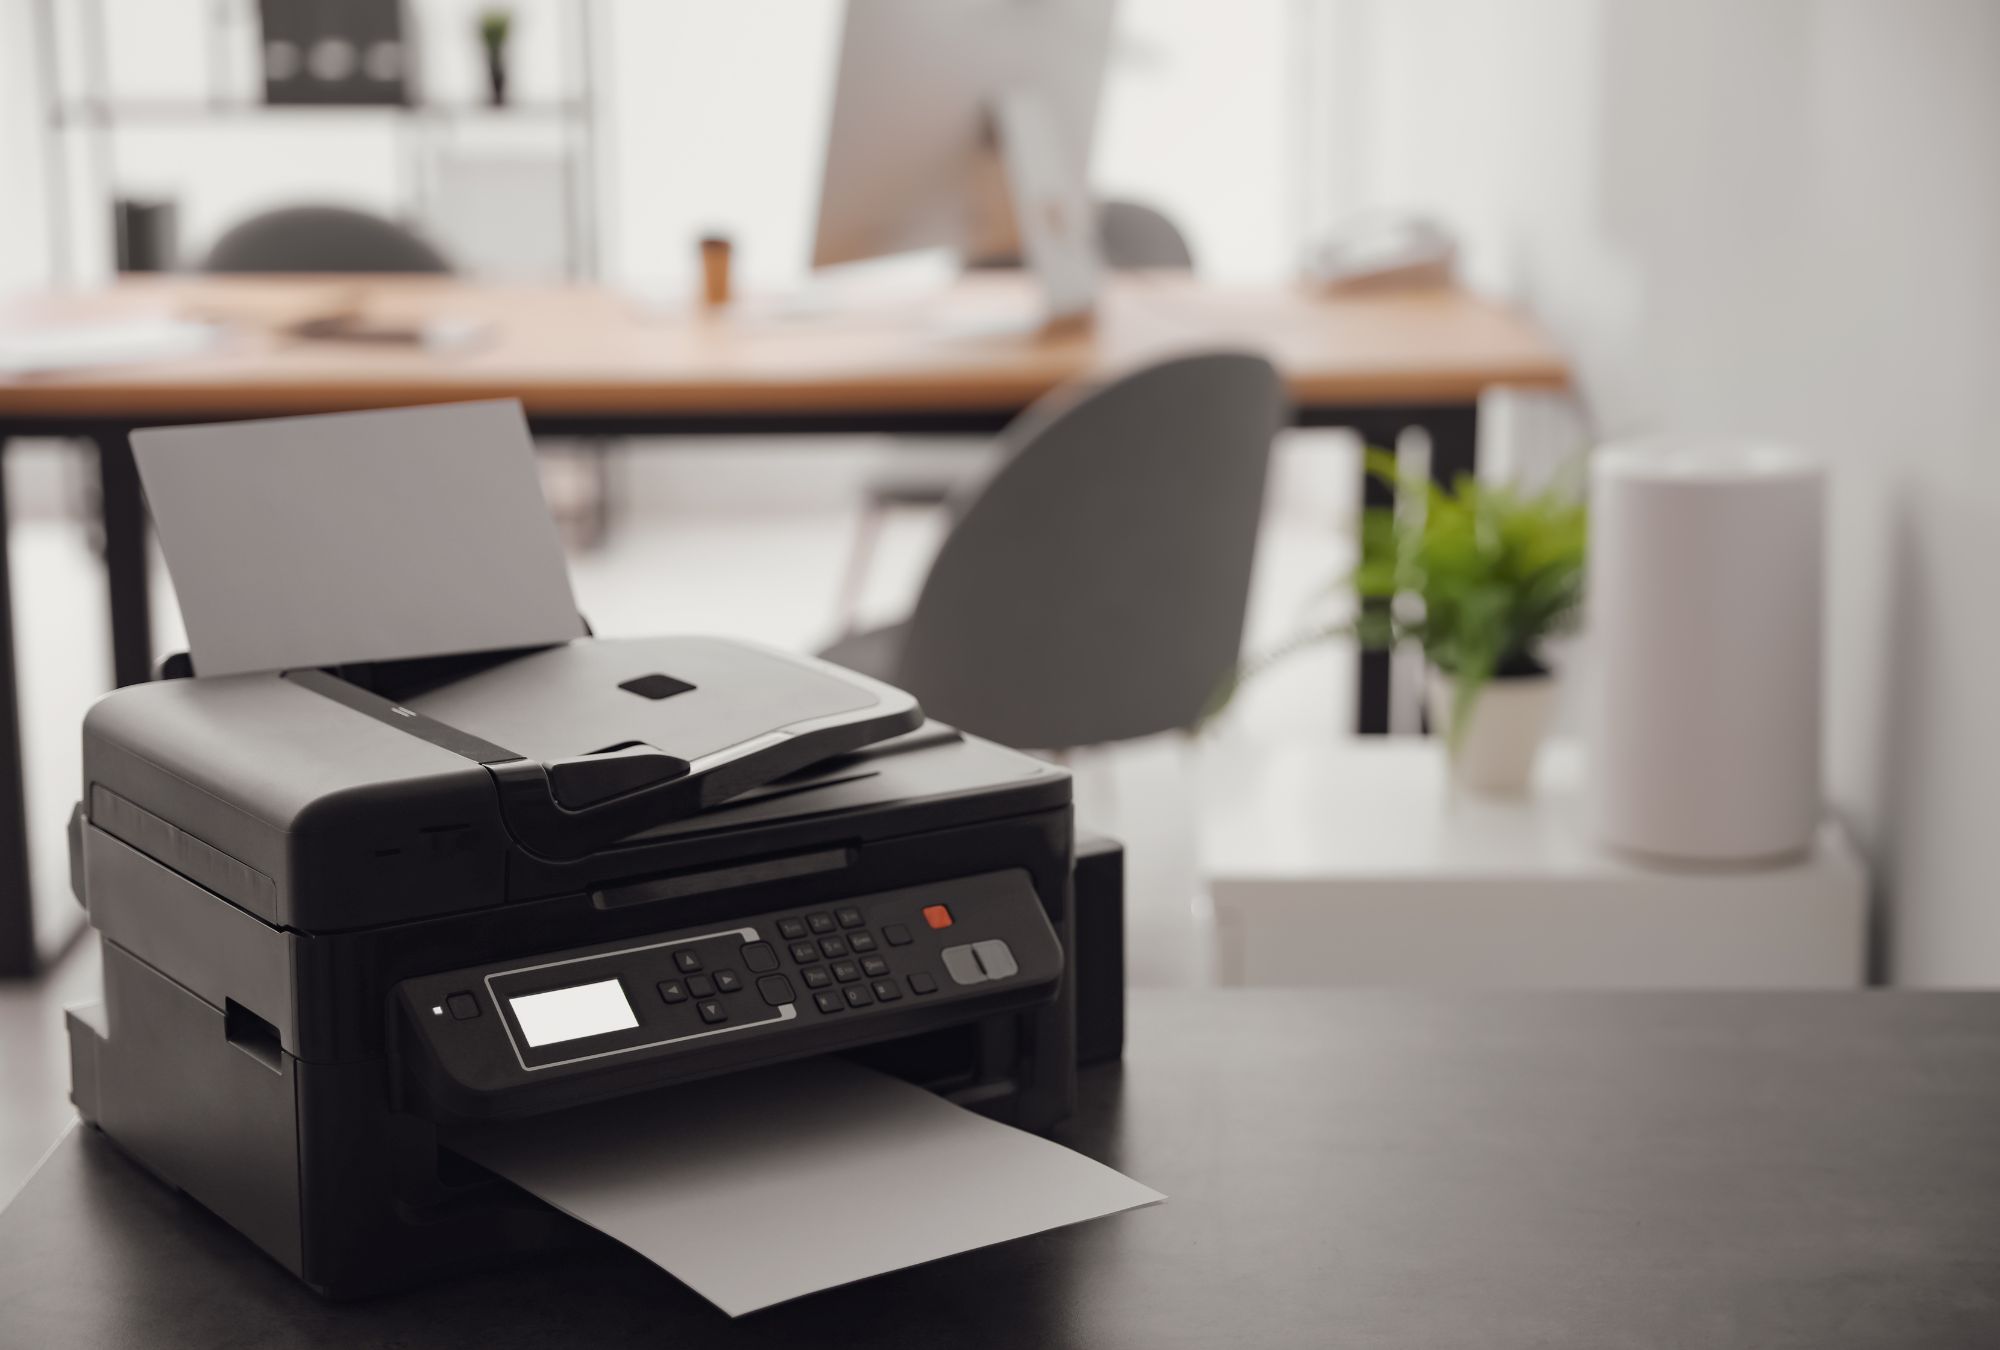 What are the ideal uses for a laser printer?